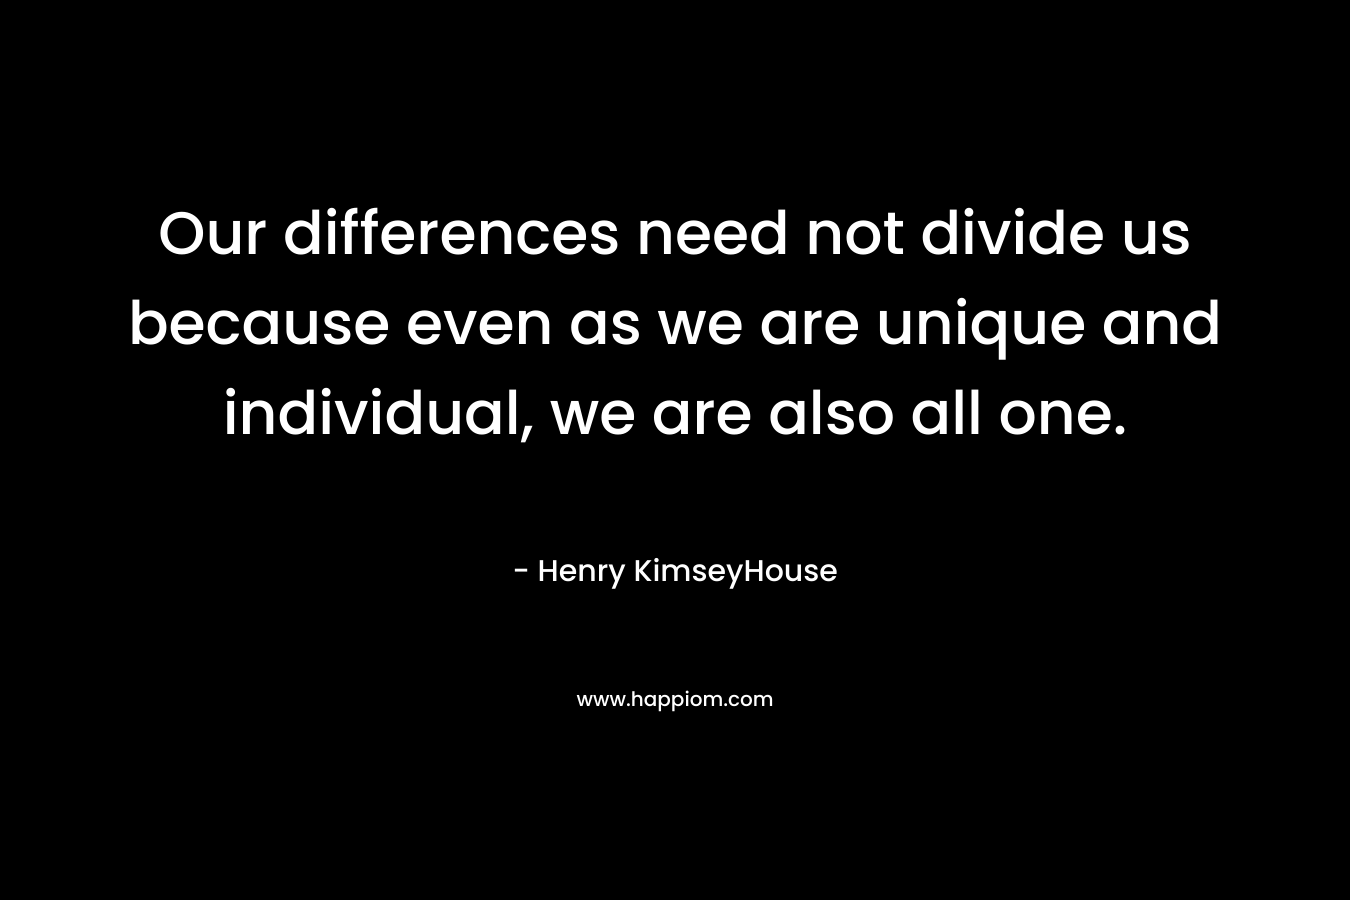 Our differences need not divide us because even as we are unique and individual, we are also all one. – Henry KimseyHouse